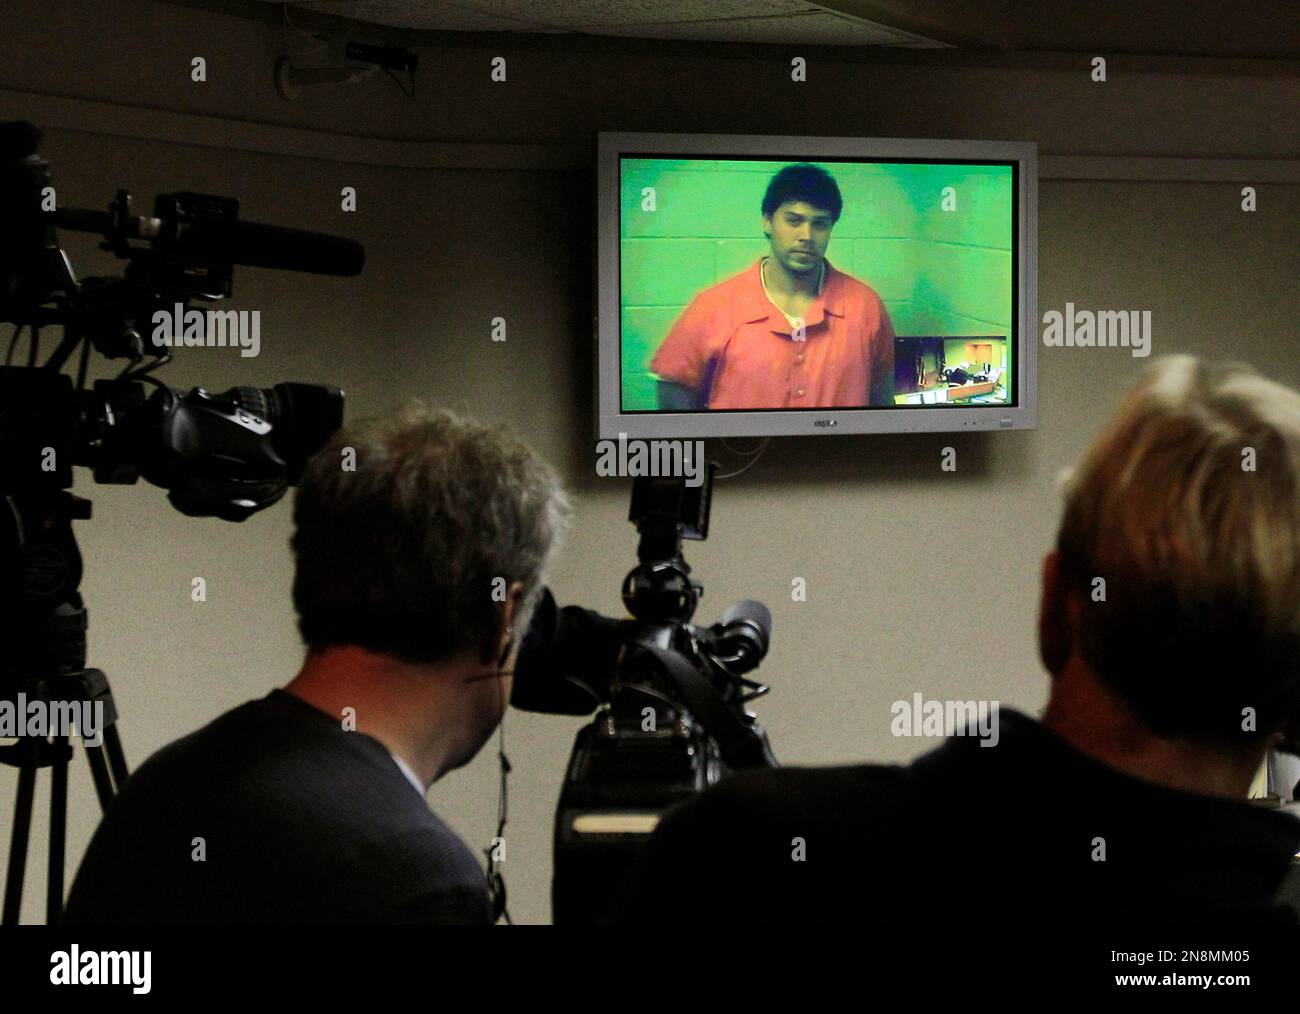 Raulie Casteel is arraigned via video at the 52 1 District Court in